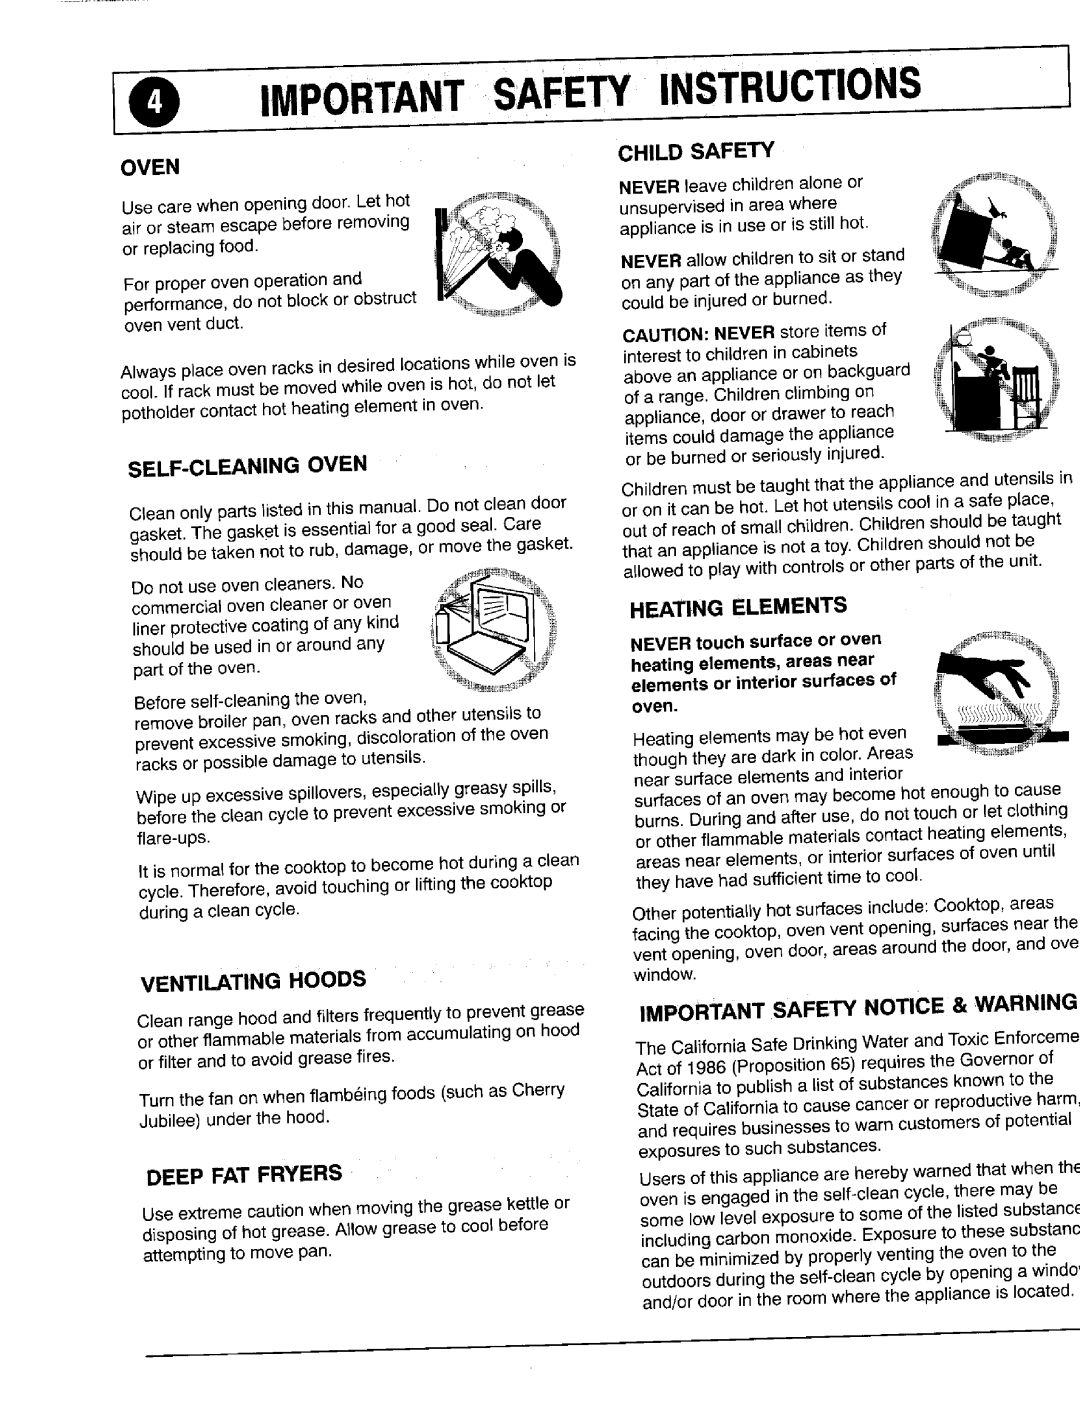 Maytag 8111P375-60 Importansafetyinstructions, Oven, Child Safety, Self-Cleaningoven, Heating Elements, Ventilating Hoods 